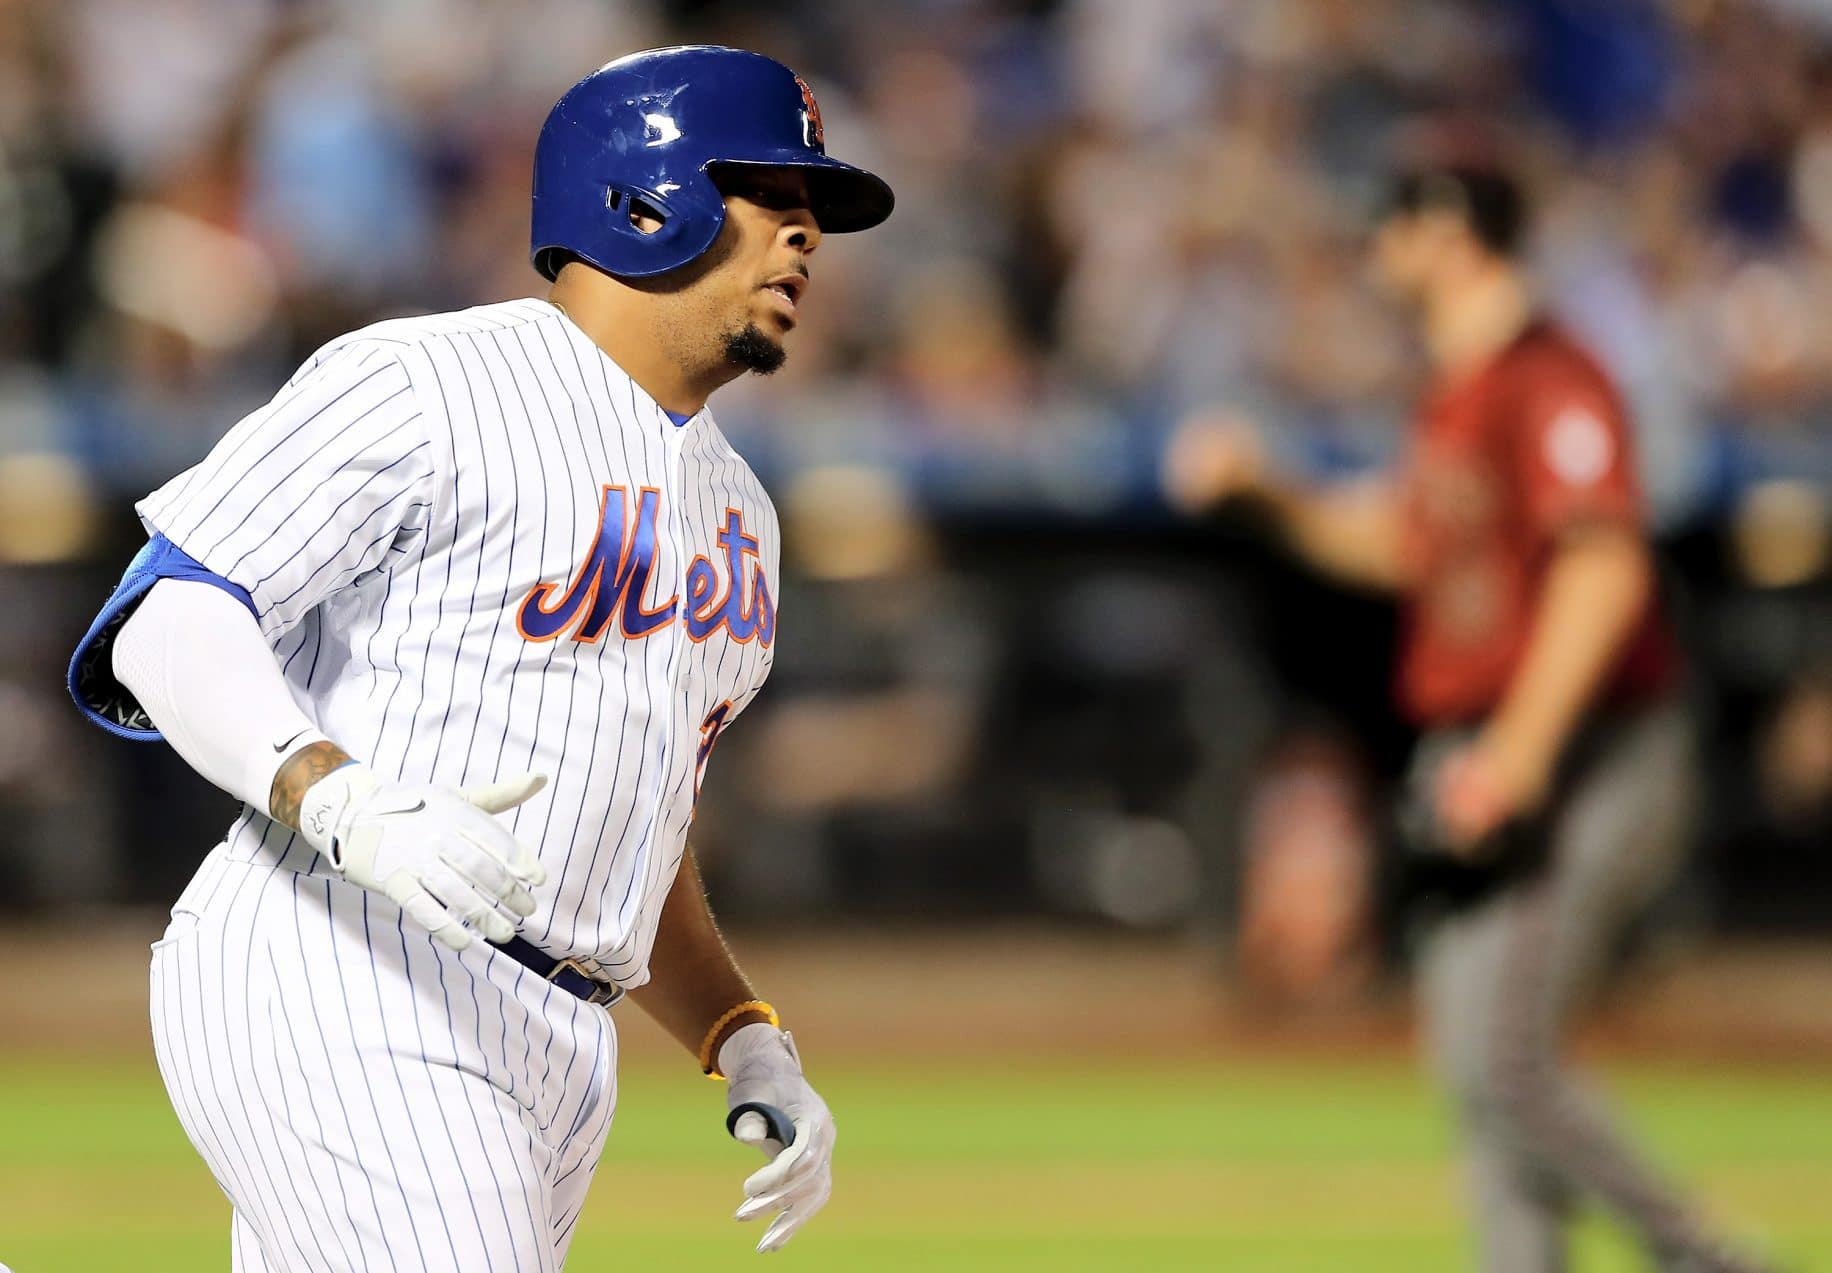 New York Mets: Dominic Smith is destined to follow in Aaron Judge's footsteps